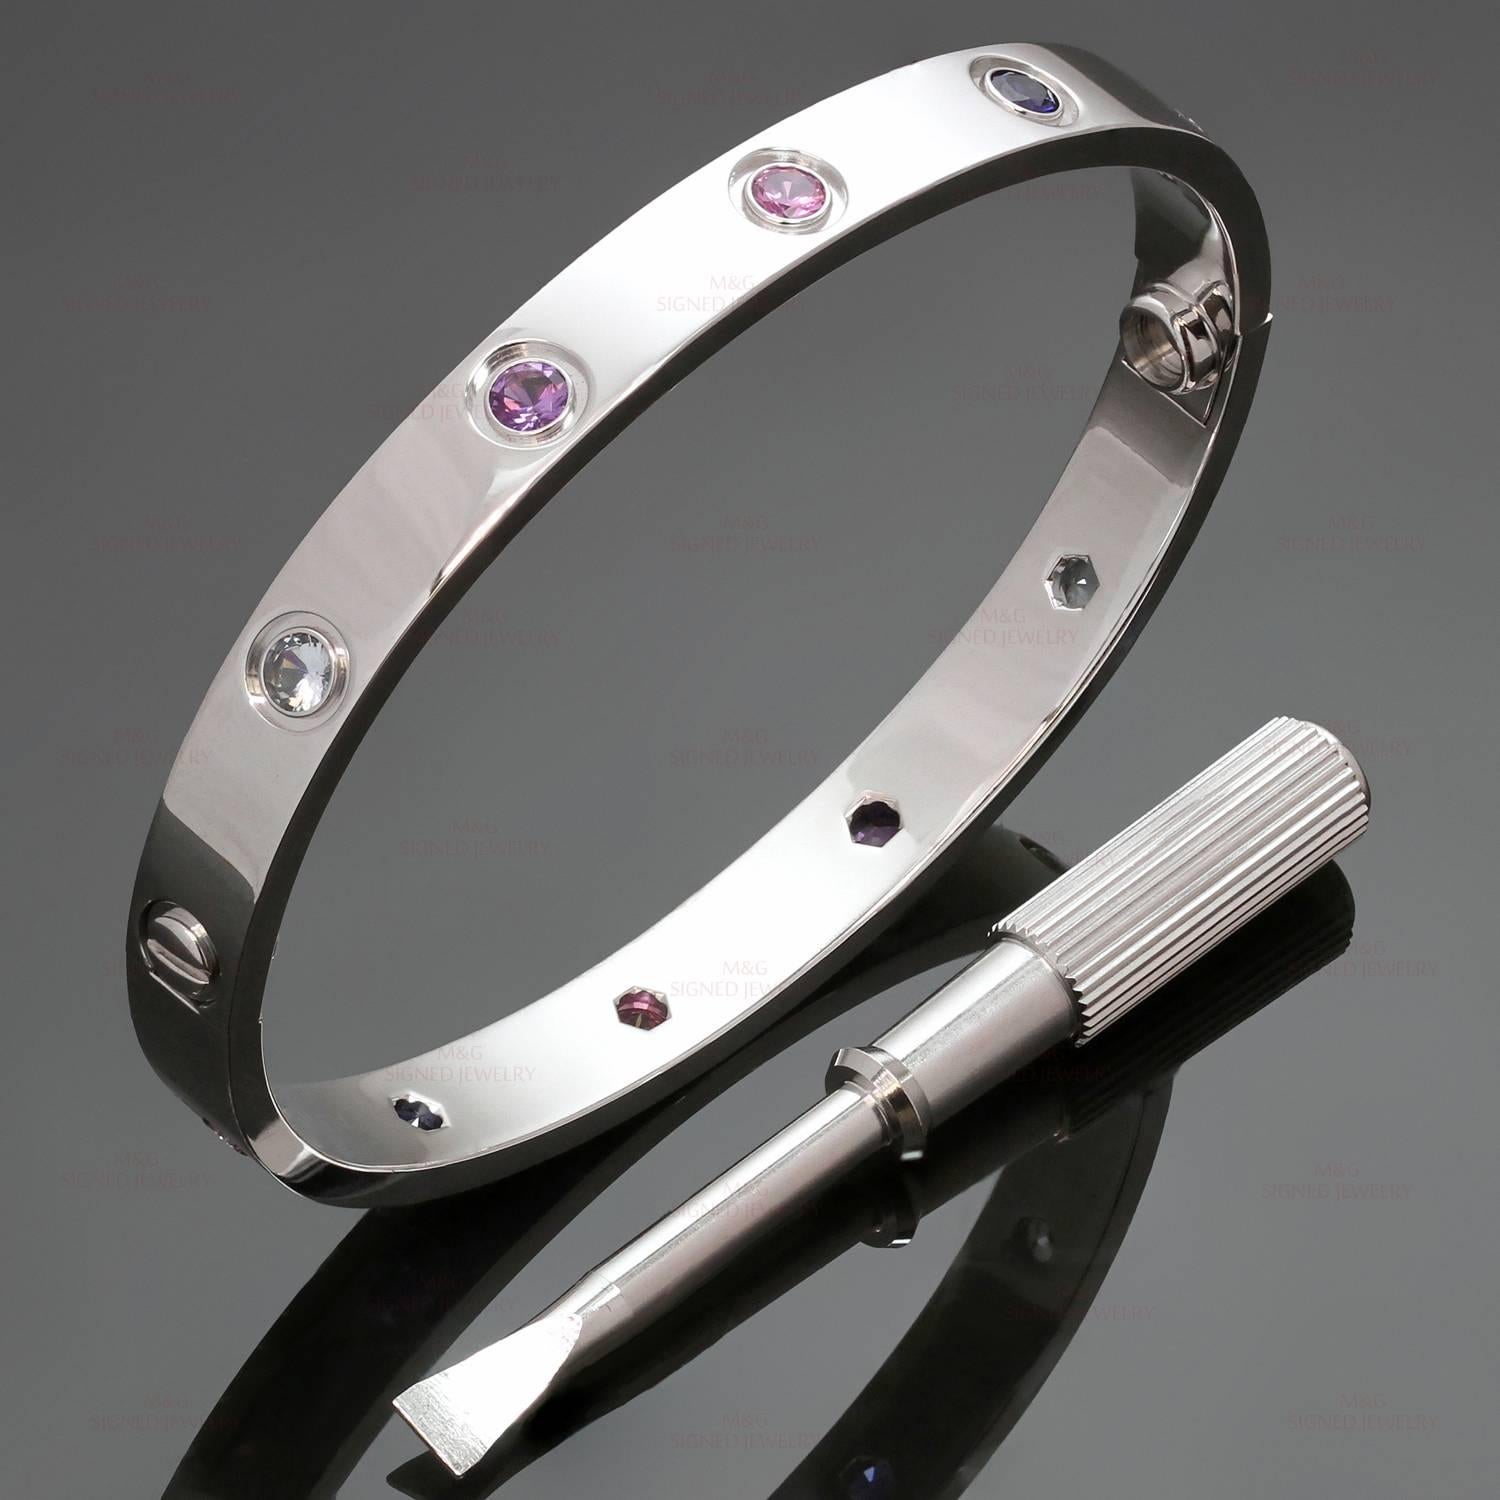 This chic Cartier bracelet from the iconic Love collection is made in 18k white gold and bezel-set with 2 aquamarines, 2 pink sapphires, 2 blue sapphires, 2 purple spinels and 2 amethysts. Completed with a screwdriver, service receipt and Cartier